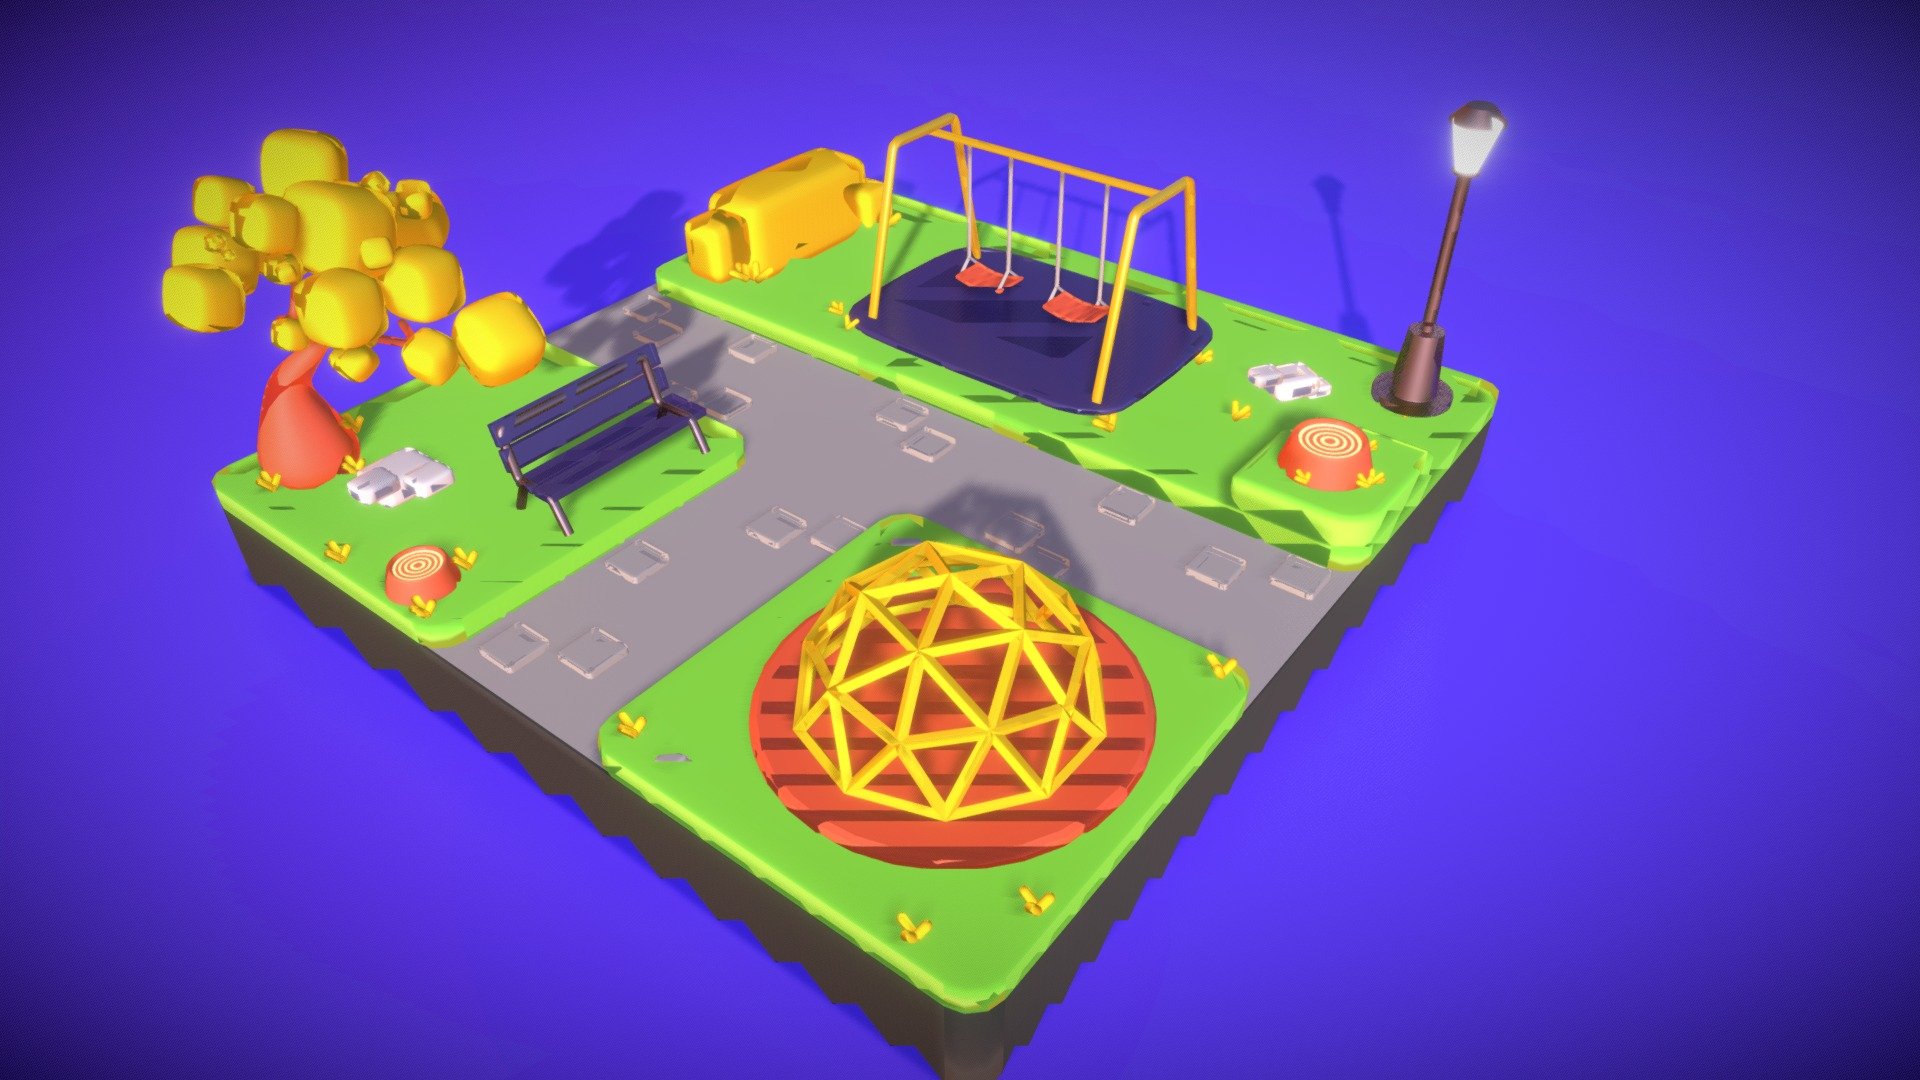 Made this little playground scene to create a specific style 3d model